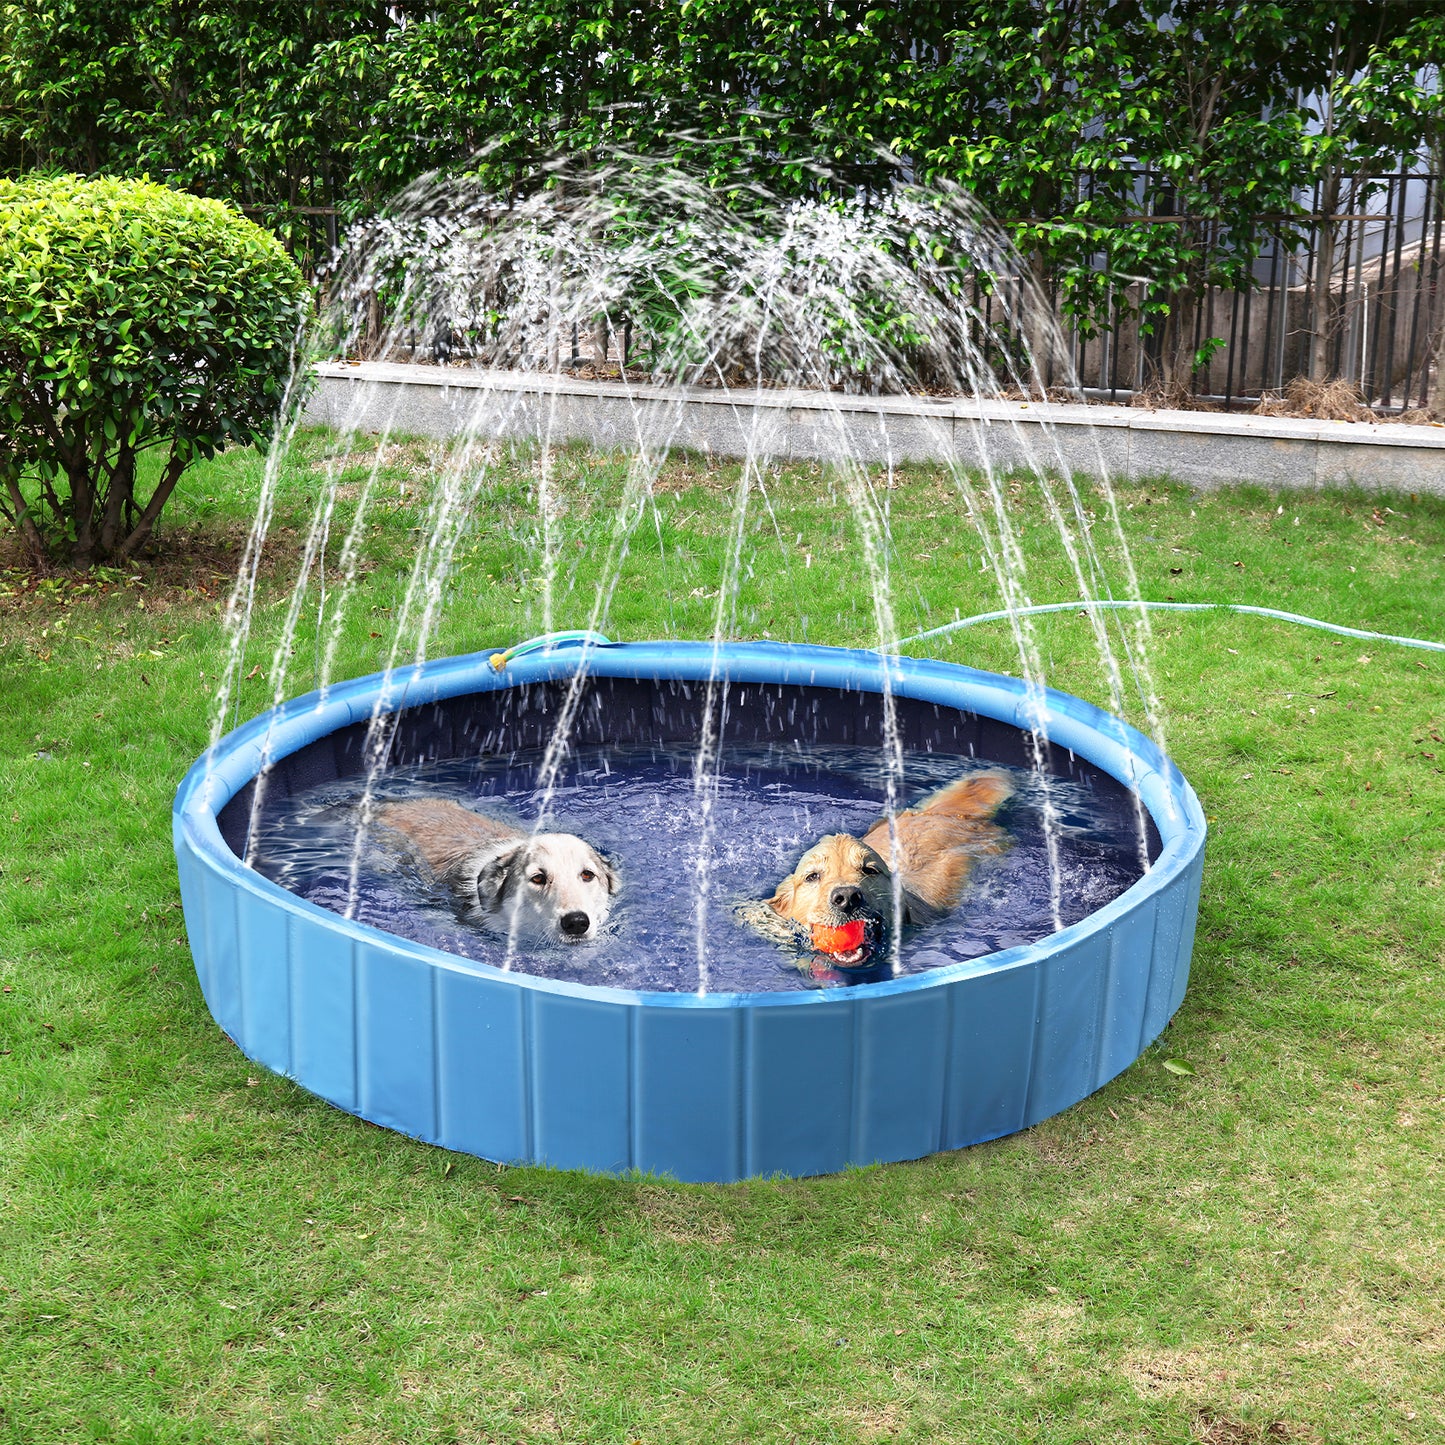 Dog Swimming Pool: Heavy Collapsible Dog Pet Swimming Pool with Spray Sprinkler Pet Bathing Tub for Outside Backyards, Kids Pets Dogs Cats